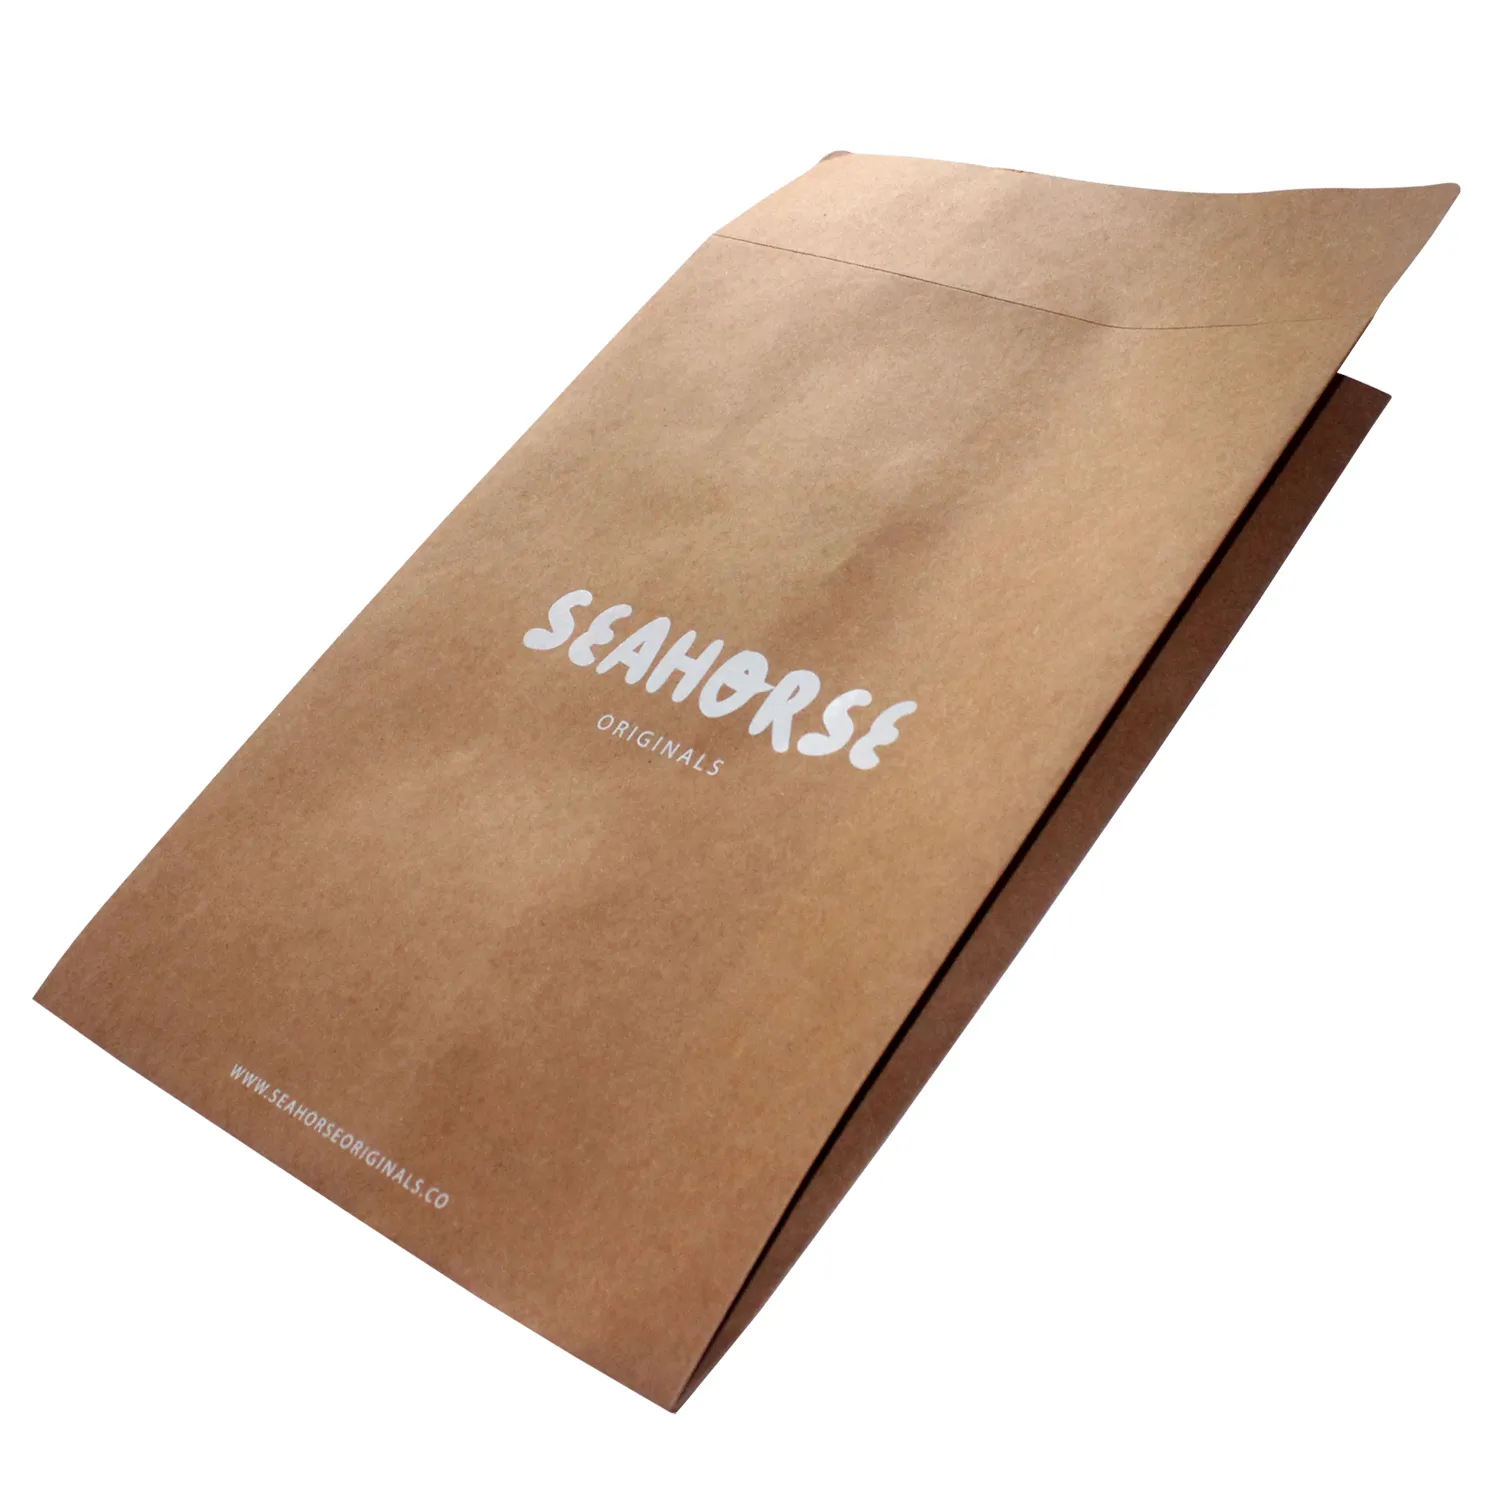 Recycled biodegradable kraft bag paper mailing envelope expandable shipping bag for apparel